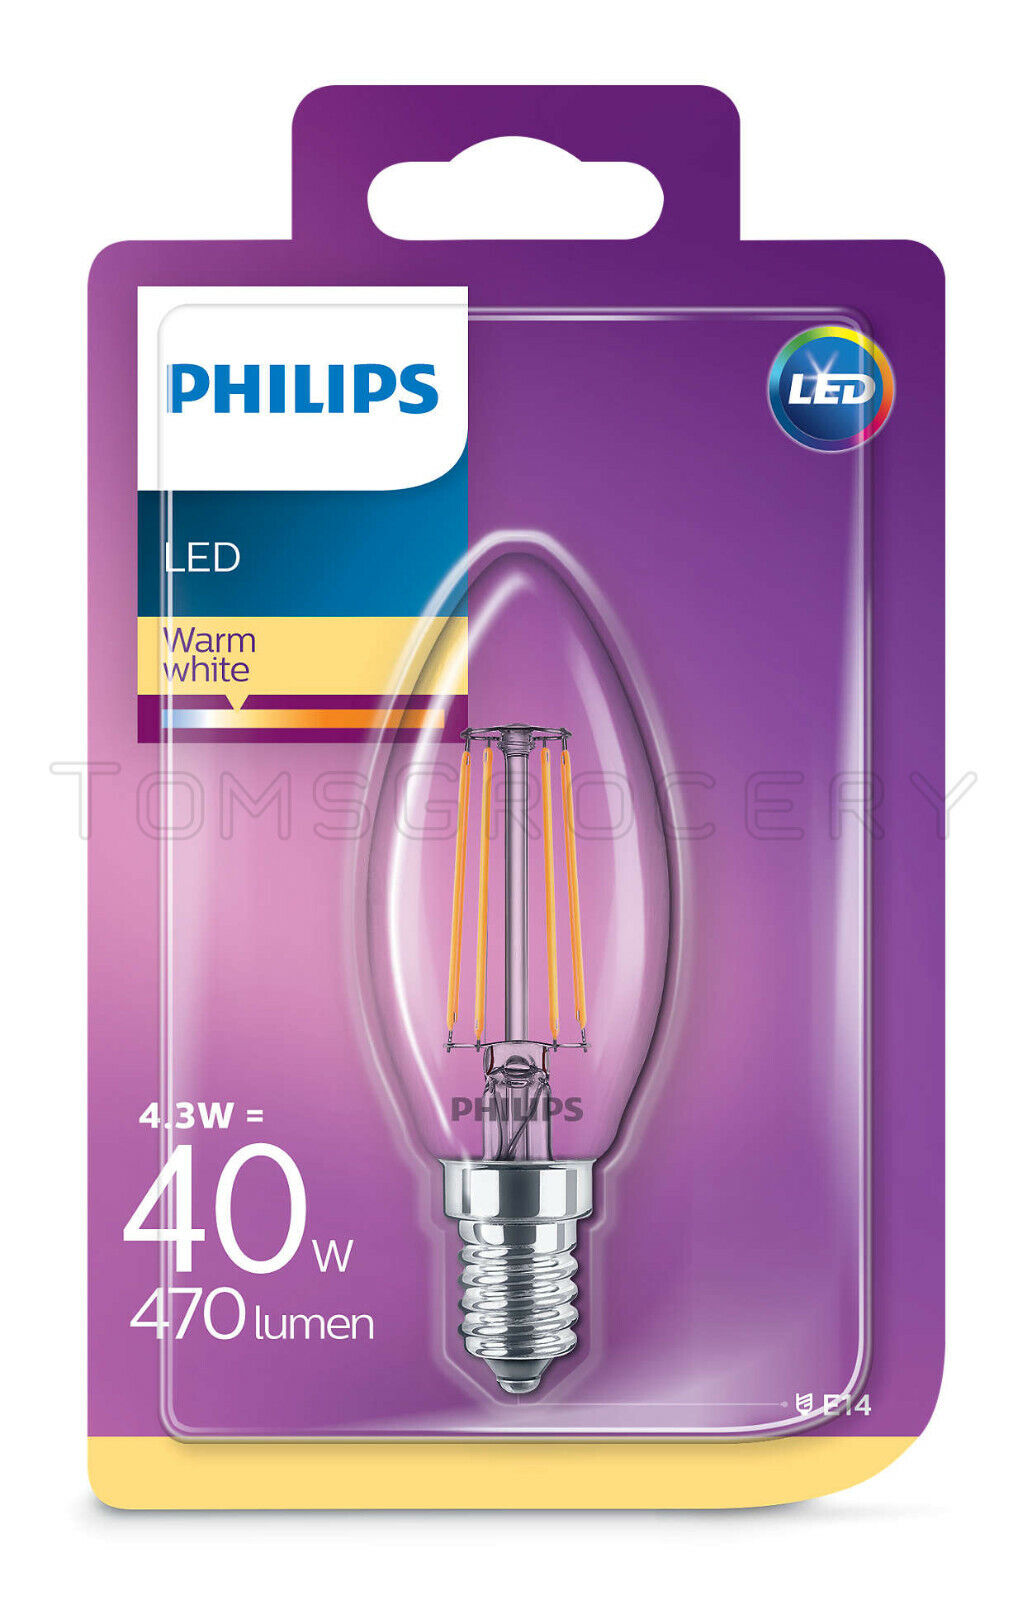 Conceit heden Uit 2 x Philips LED Deco E14 4.3W 40W B35 Vintage Candle Bulbs Warm White A++  8718696587355 | eBay